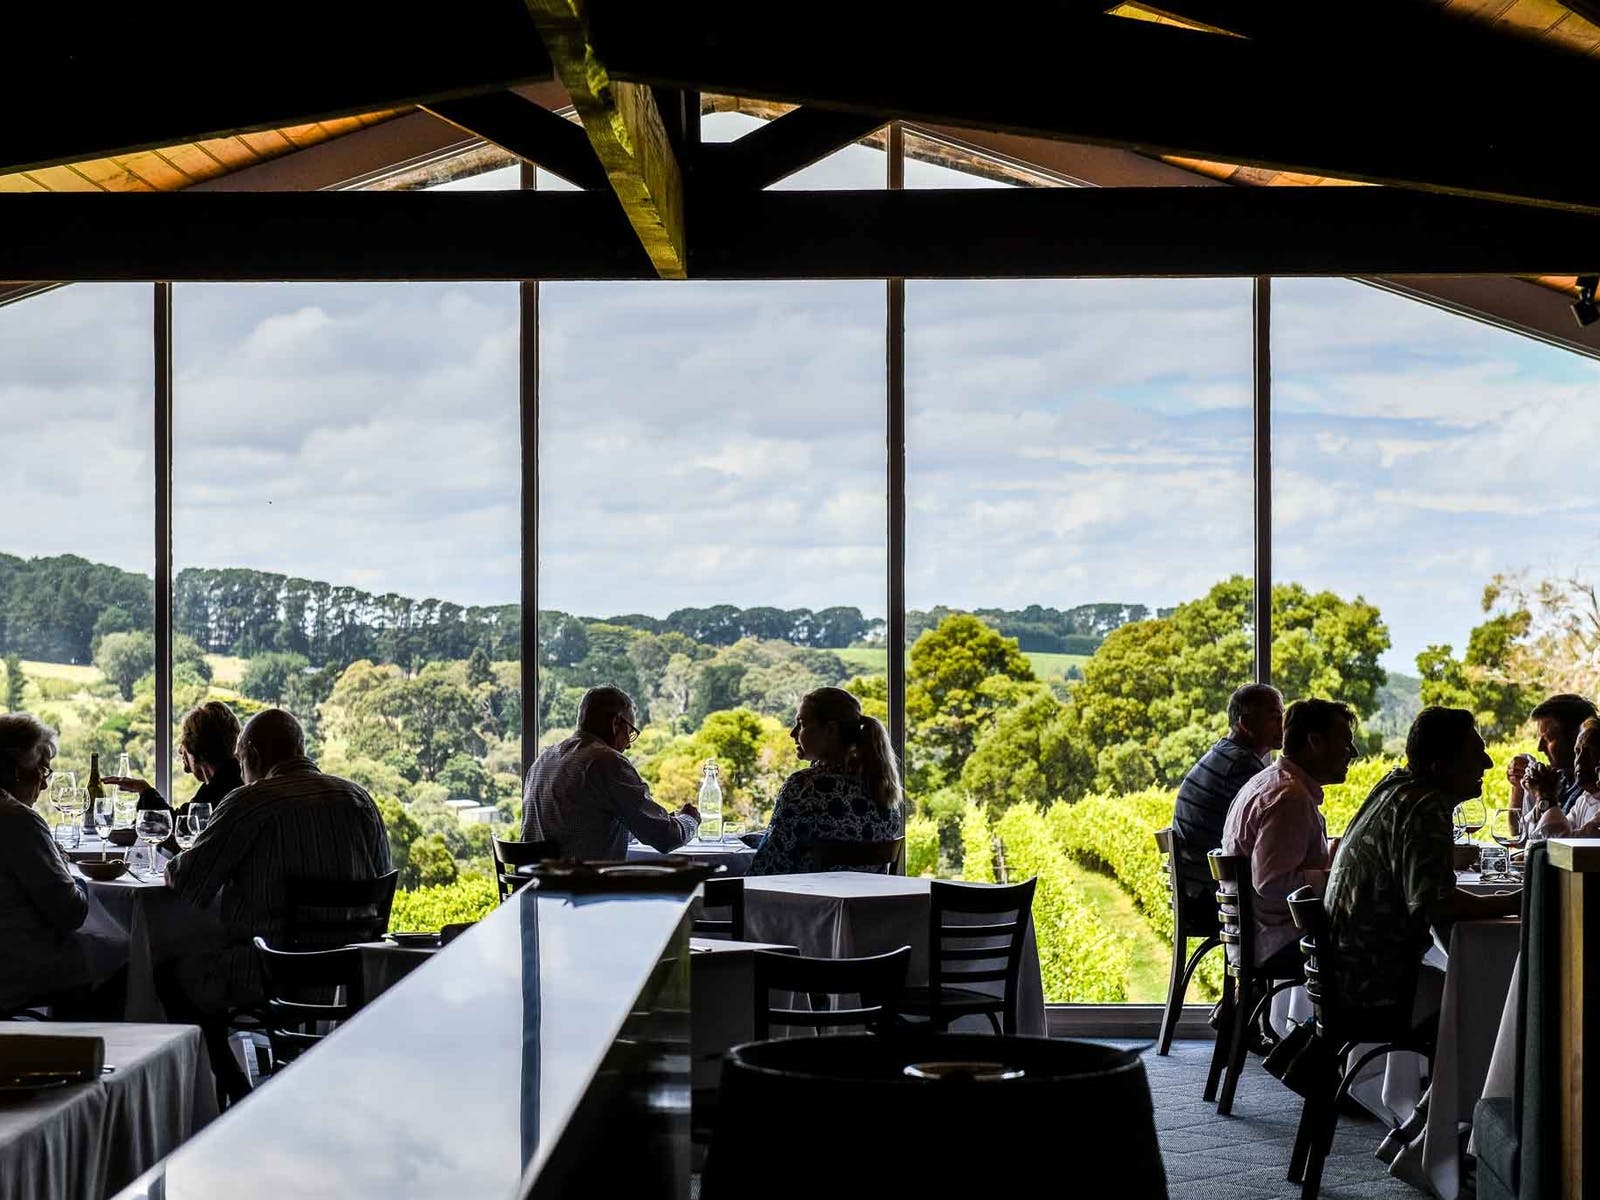 People sitting on tables at Paringa Estate in front of floor to ceiling windows, overlooking vineyards.